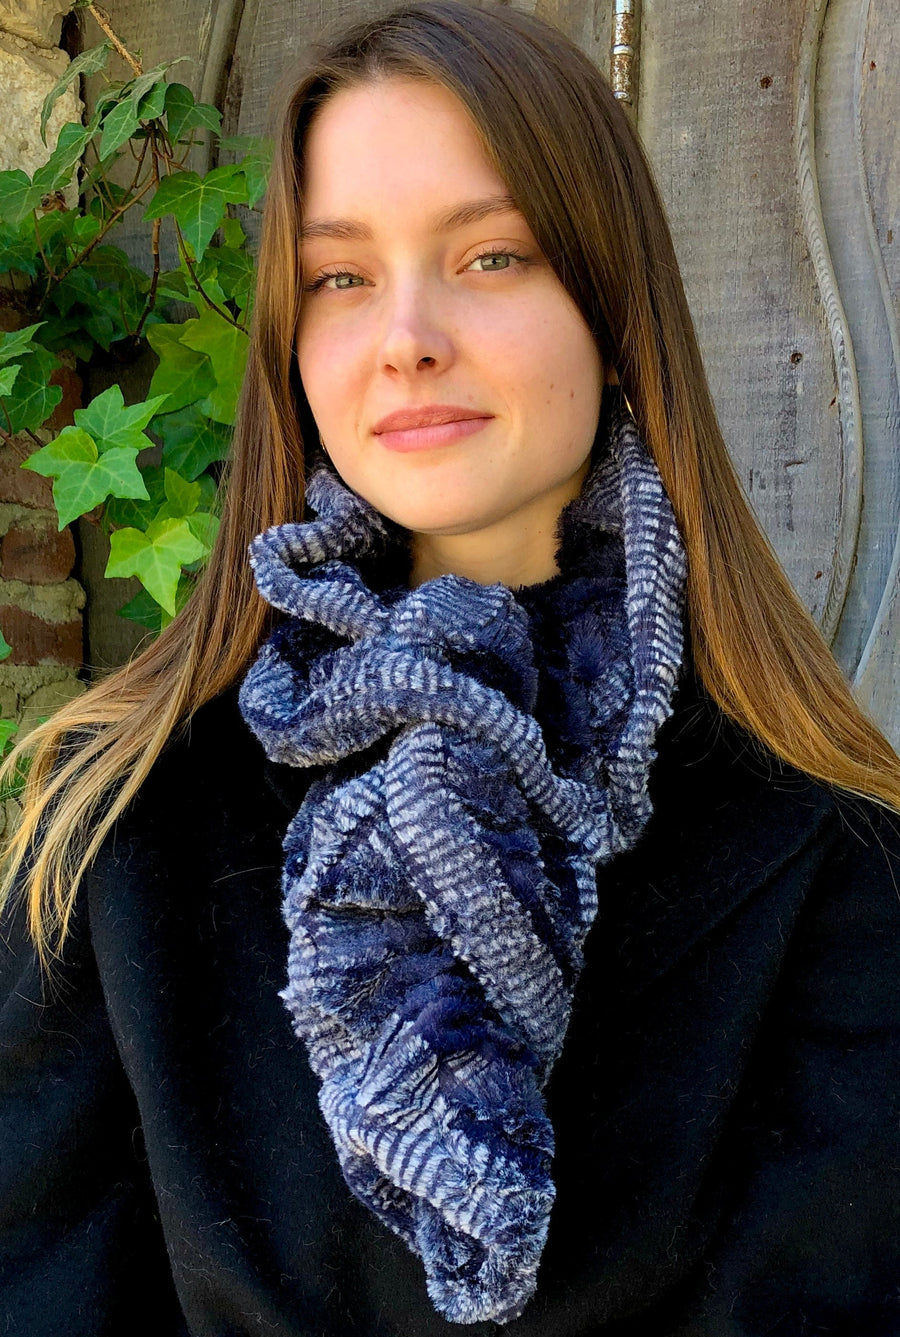 women keeping her Neck Warm with a scarf-like blue with soft white stripes on the edge colored Neck Warmer which is the called the Indigo Neck Warmer